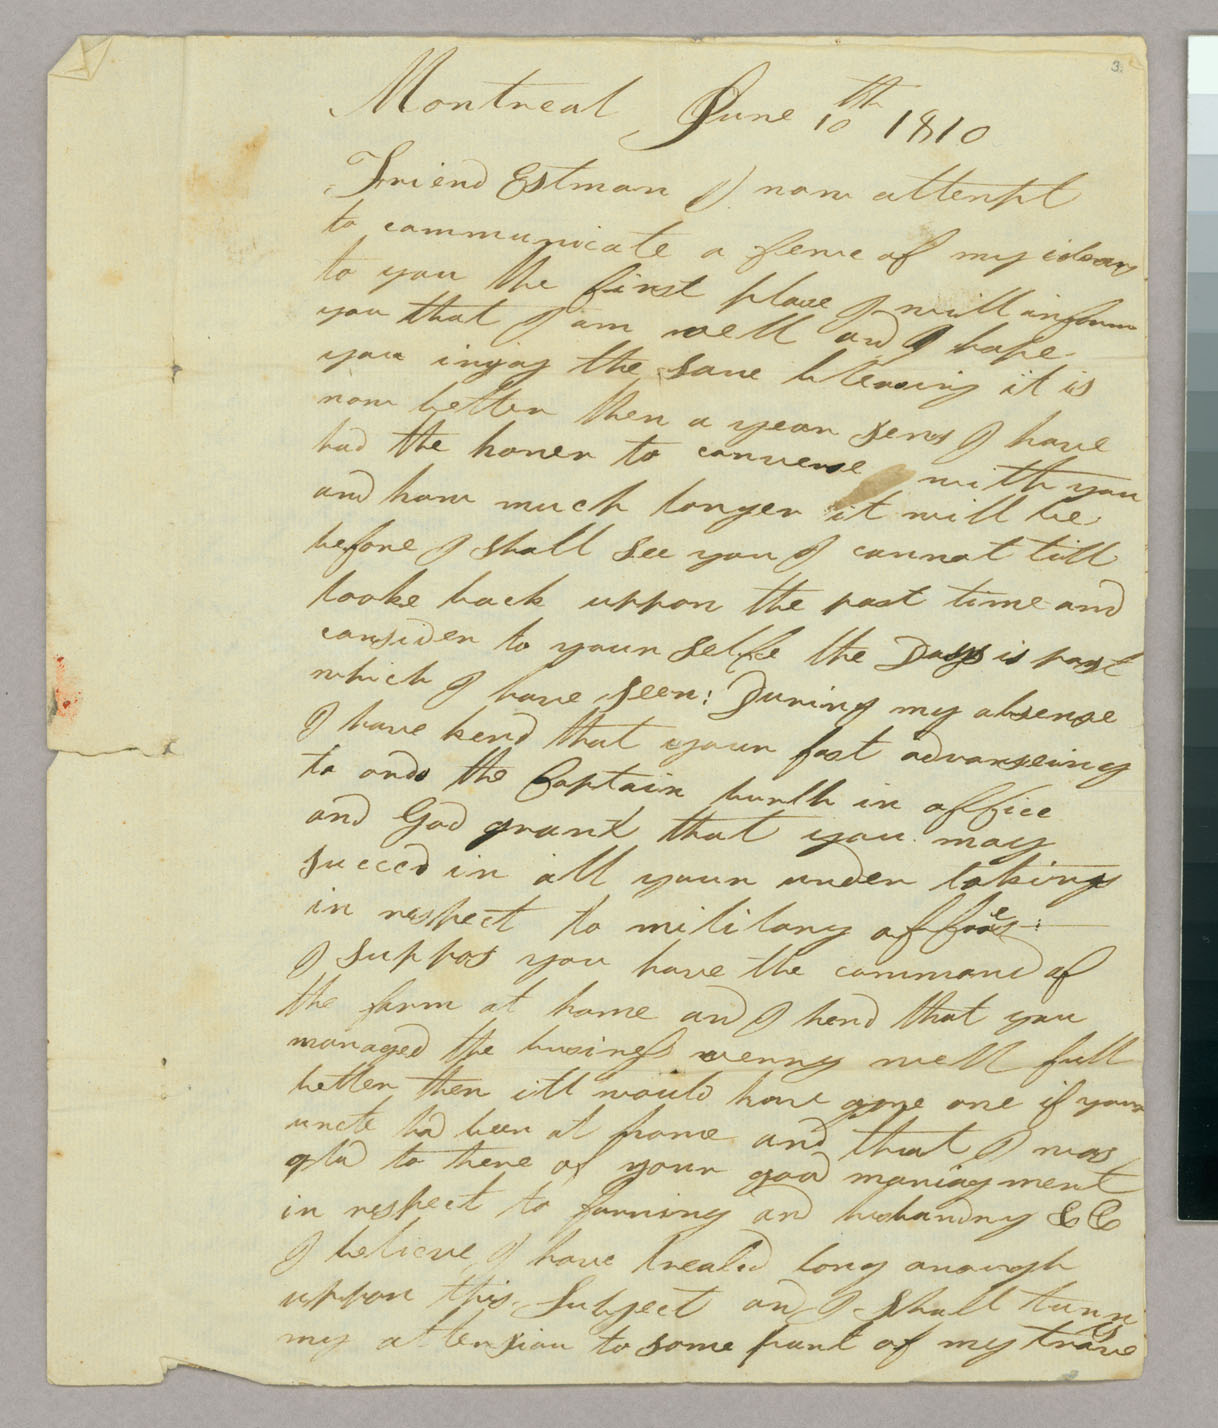 Letter, [Lewis Blanchard], Montreal, Lower Canada, to Mr Thomas Estman, Peacham, Vermont, Page 1